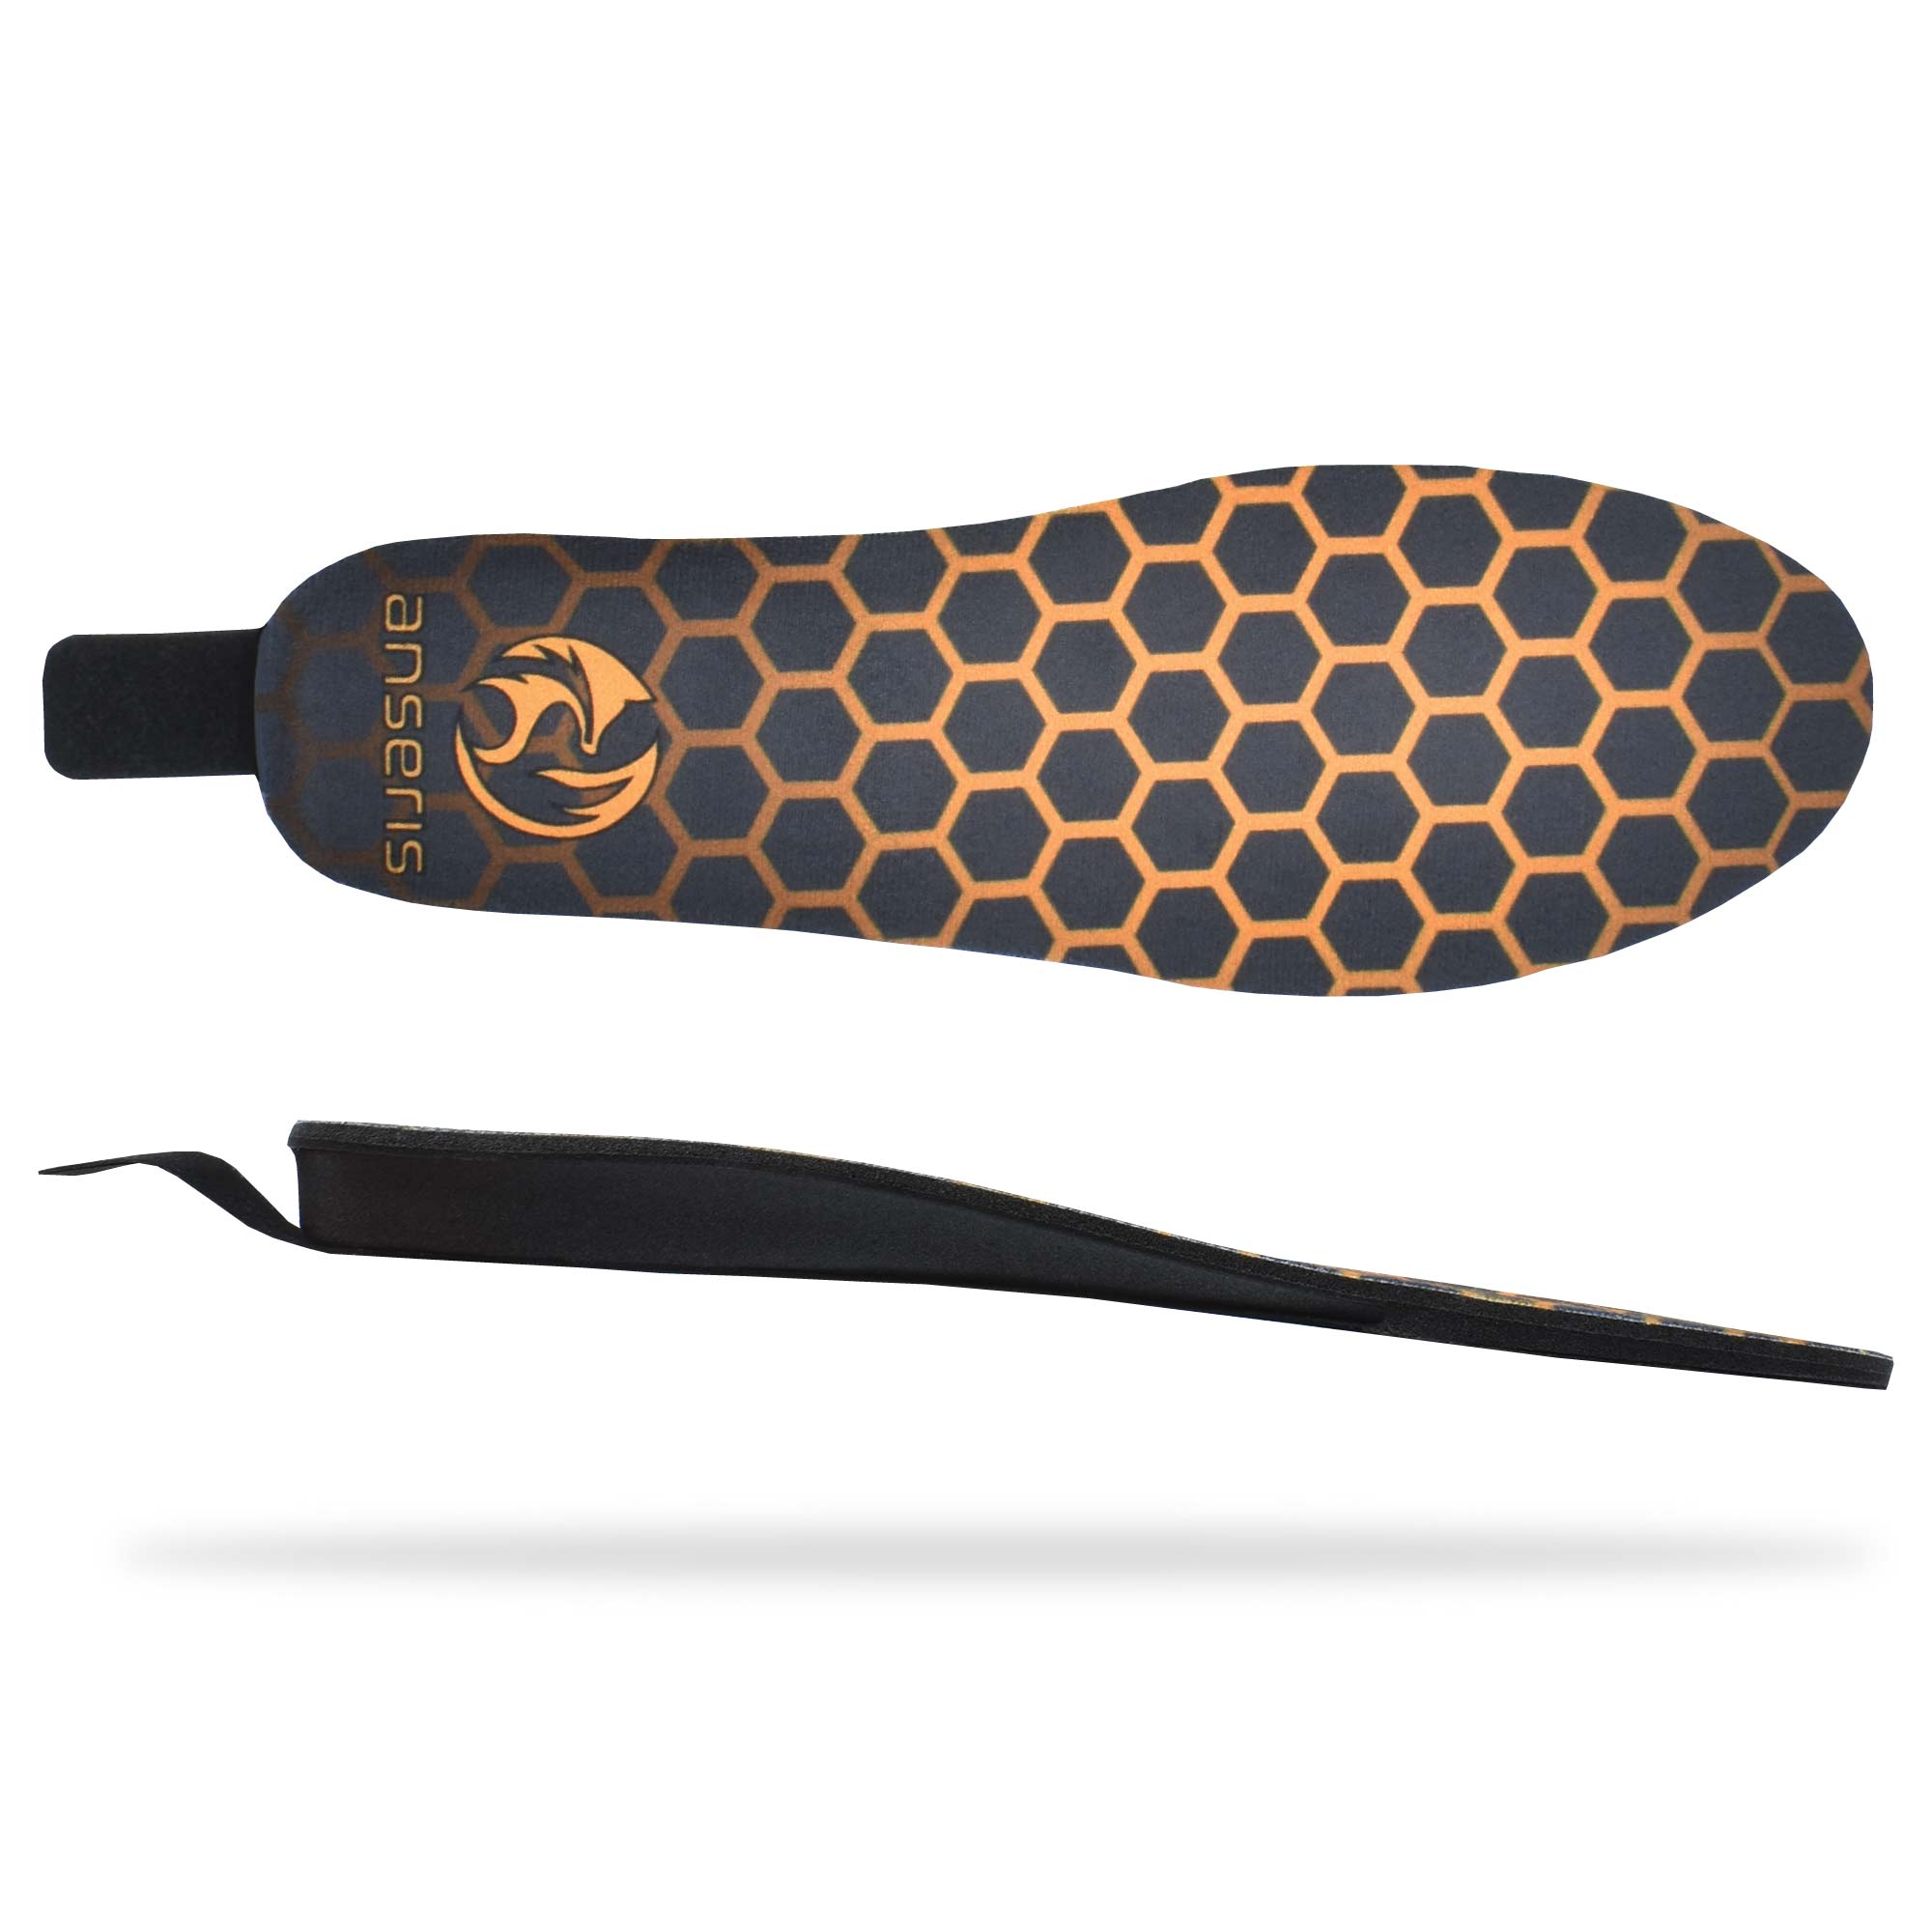 The anseris heated insoles have a super thin design to fit comfortably in any shoe or boot so you can go any adventure and heat your feet